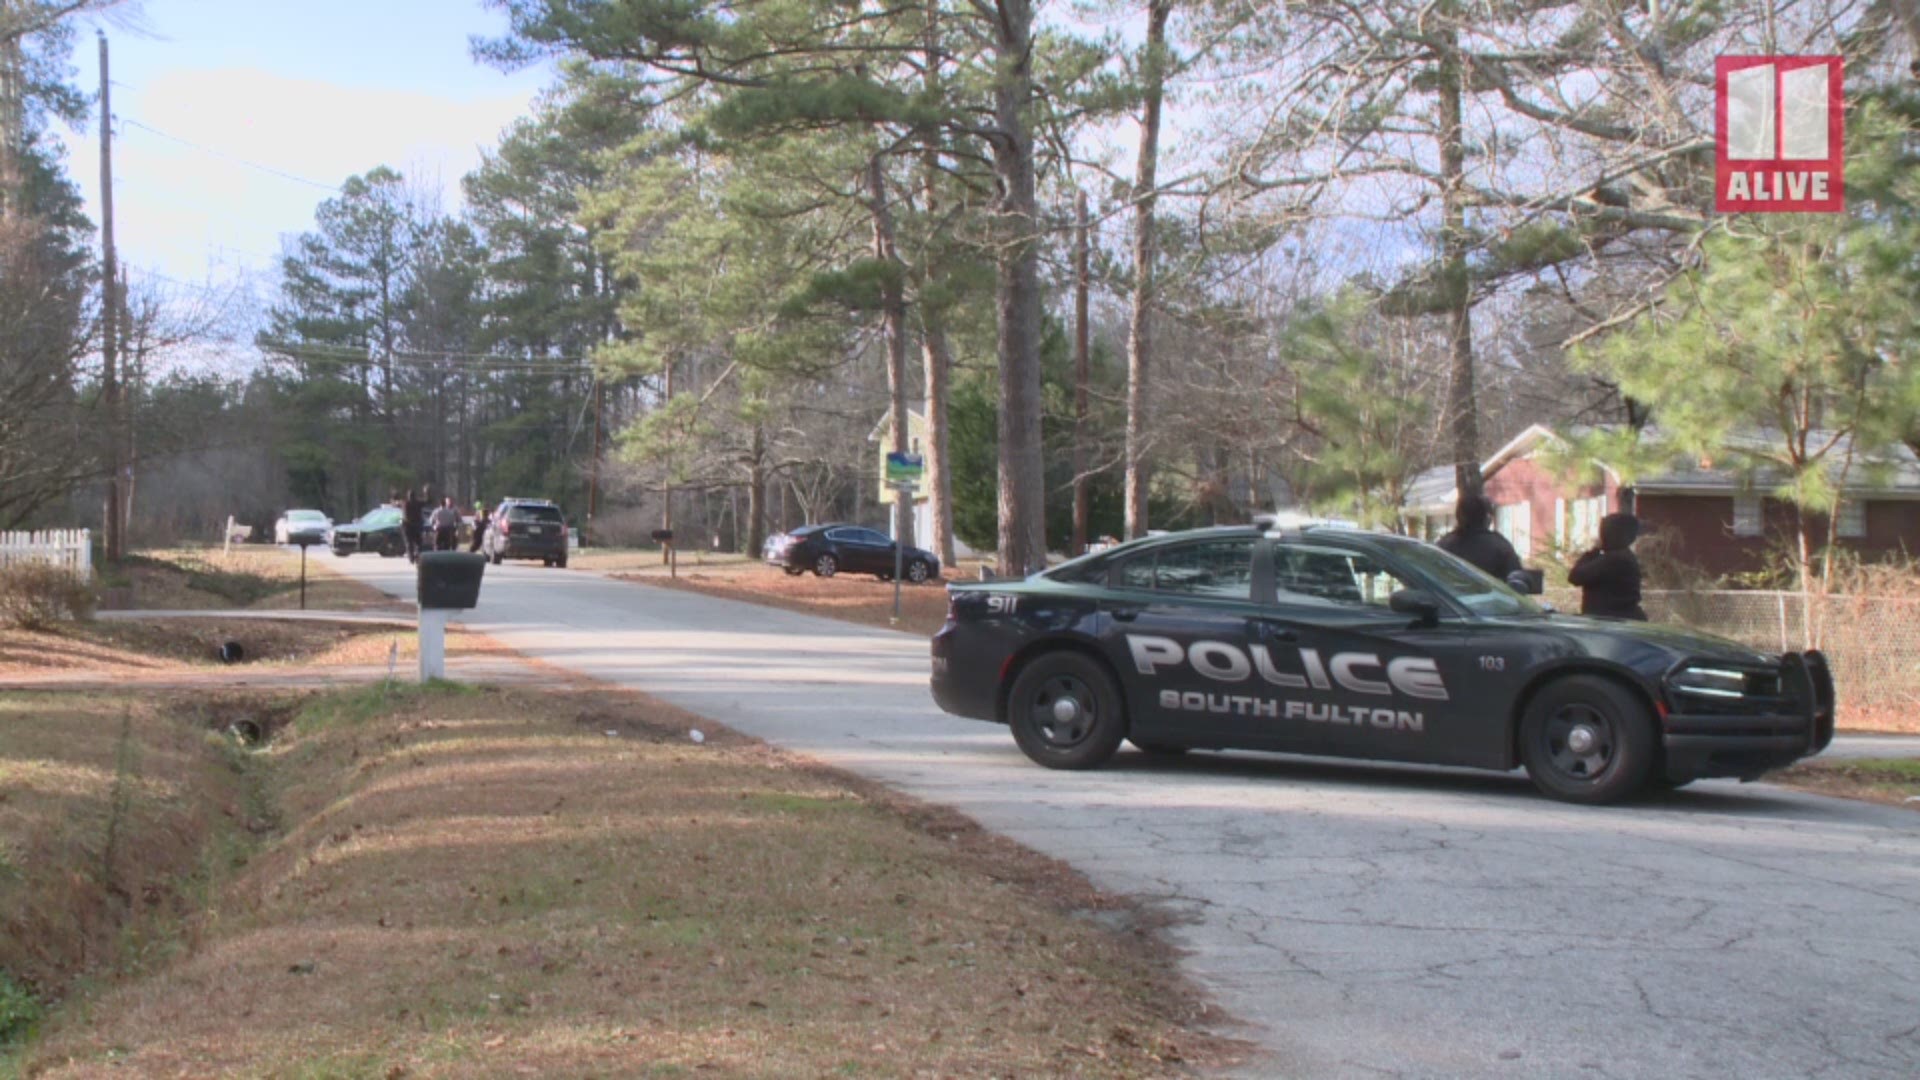 Police said a man was shot and wounded in a South Fulton subdivision Saturday afternoon. Their investigation remains underway.